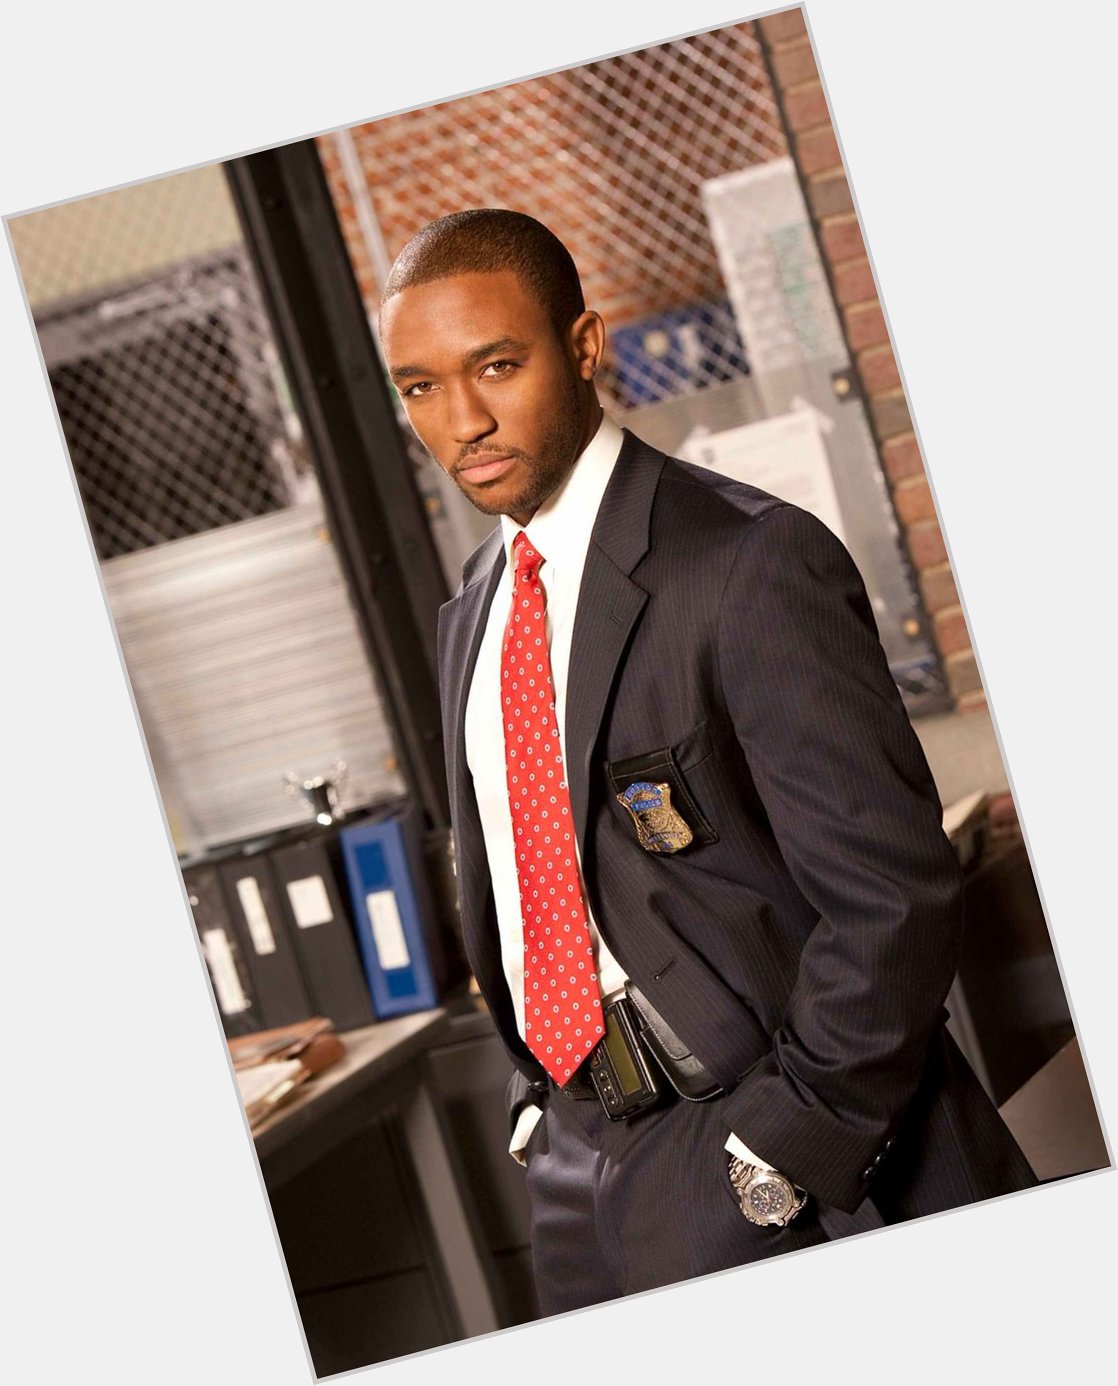 Happy birthday up there Lee Thompson Young. Still miss you 